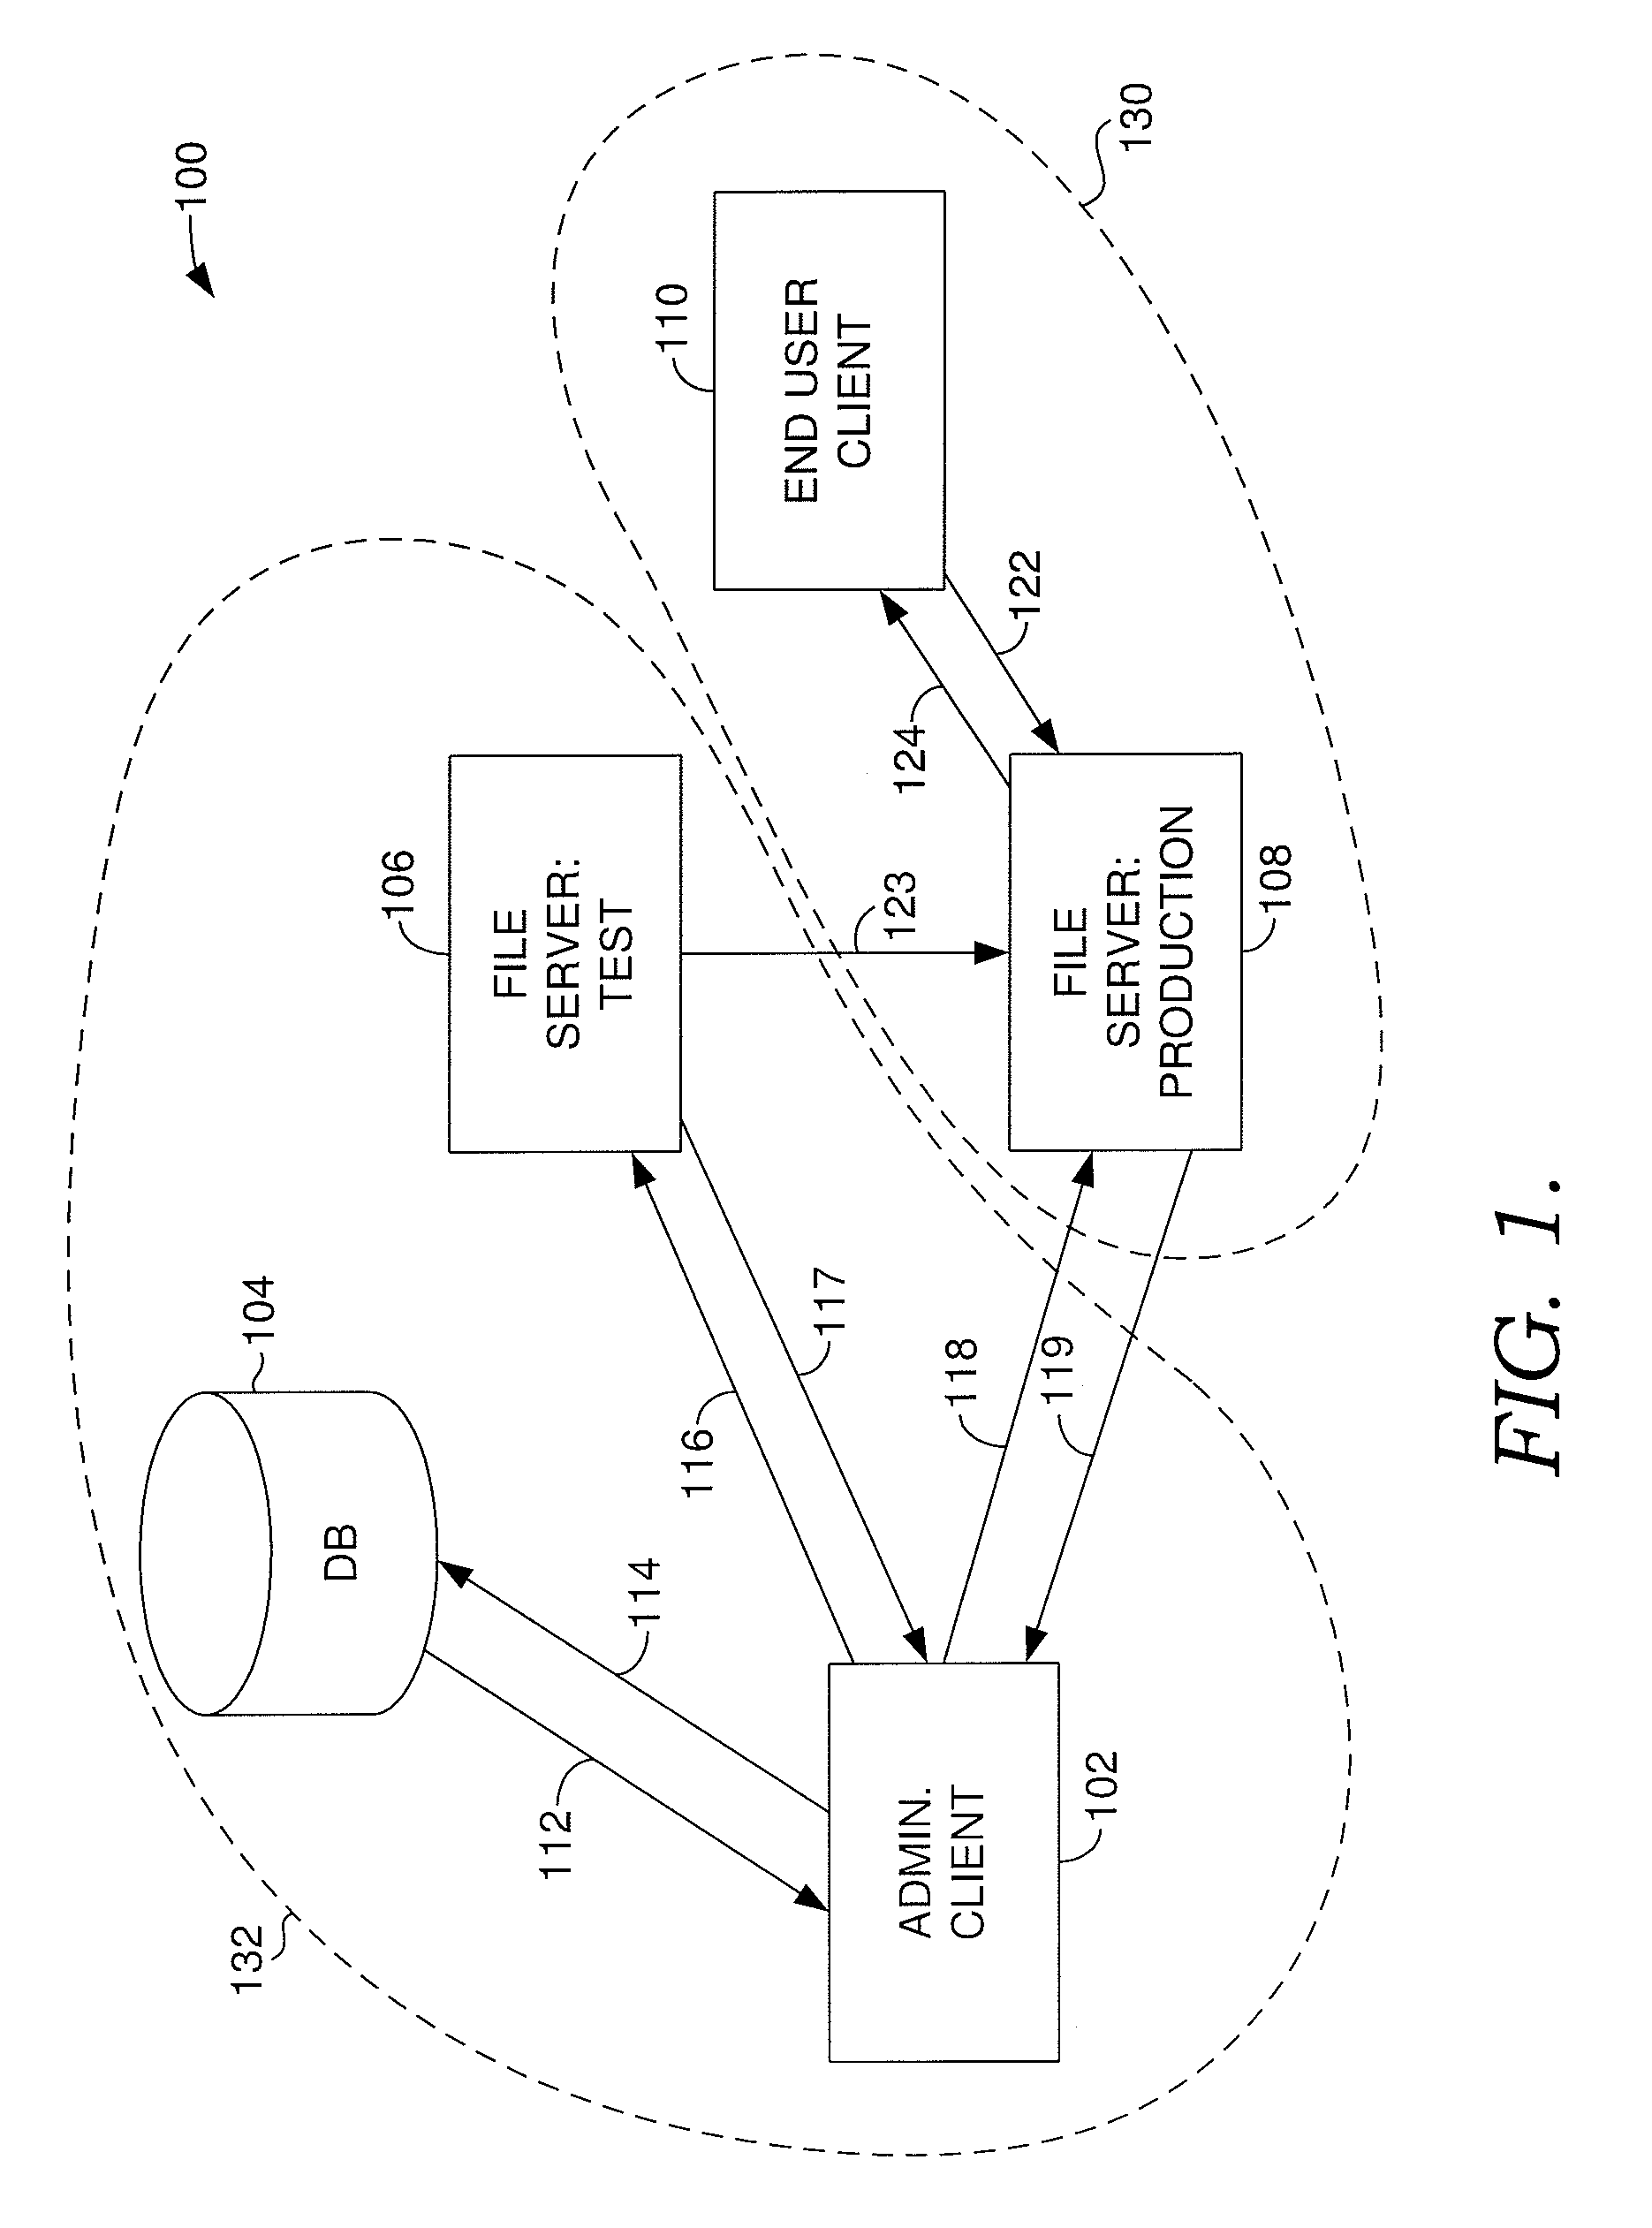 System and method for maintaining a product specification within regional parameters when selecting options